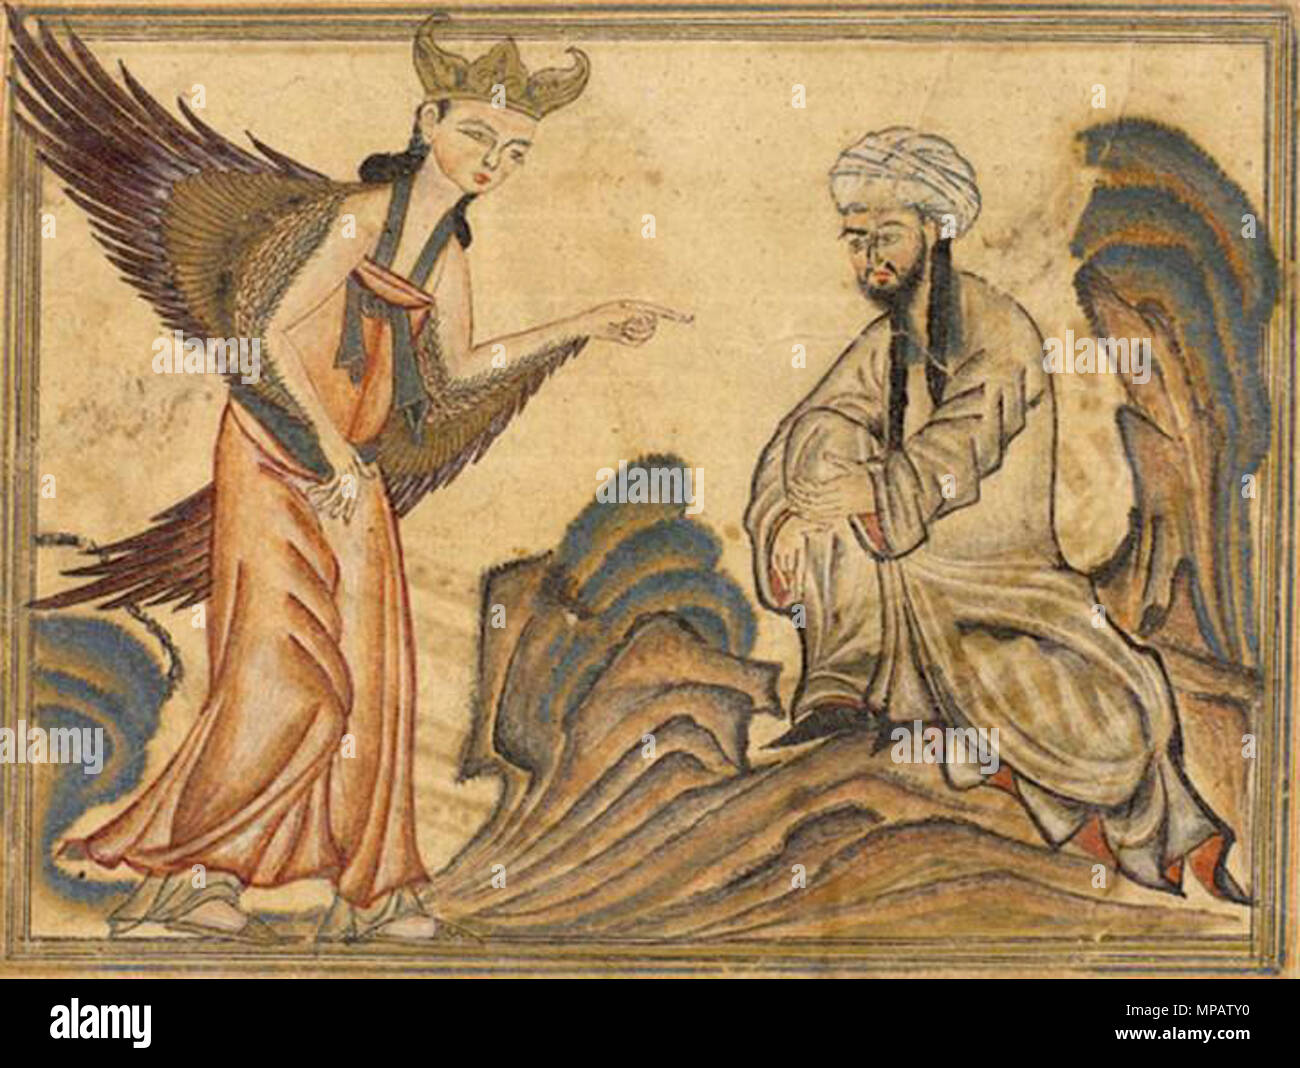 . English: Mohammed receiving his first revelation from the angel Gabriel. Miniature illustration on vellum from the book Jami' al-Tawarikh (literally 'Compendium of Chronicles' but often referred to as The Universal History or History of the World), by Rashid al-Din, published in Tabriz, Persia, 1307 CE Now in the collection of the Edinburgh University Library, Scotland. 1307 CE. Unknown 898 Mohammed receiving revelation from the angel Gabriel Stock Photo